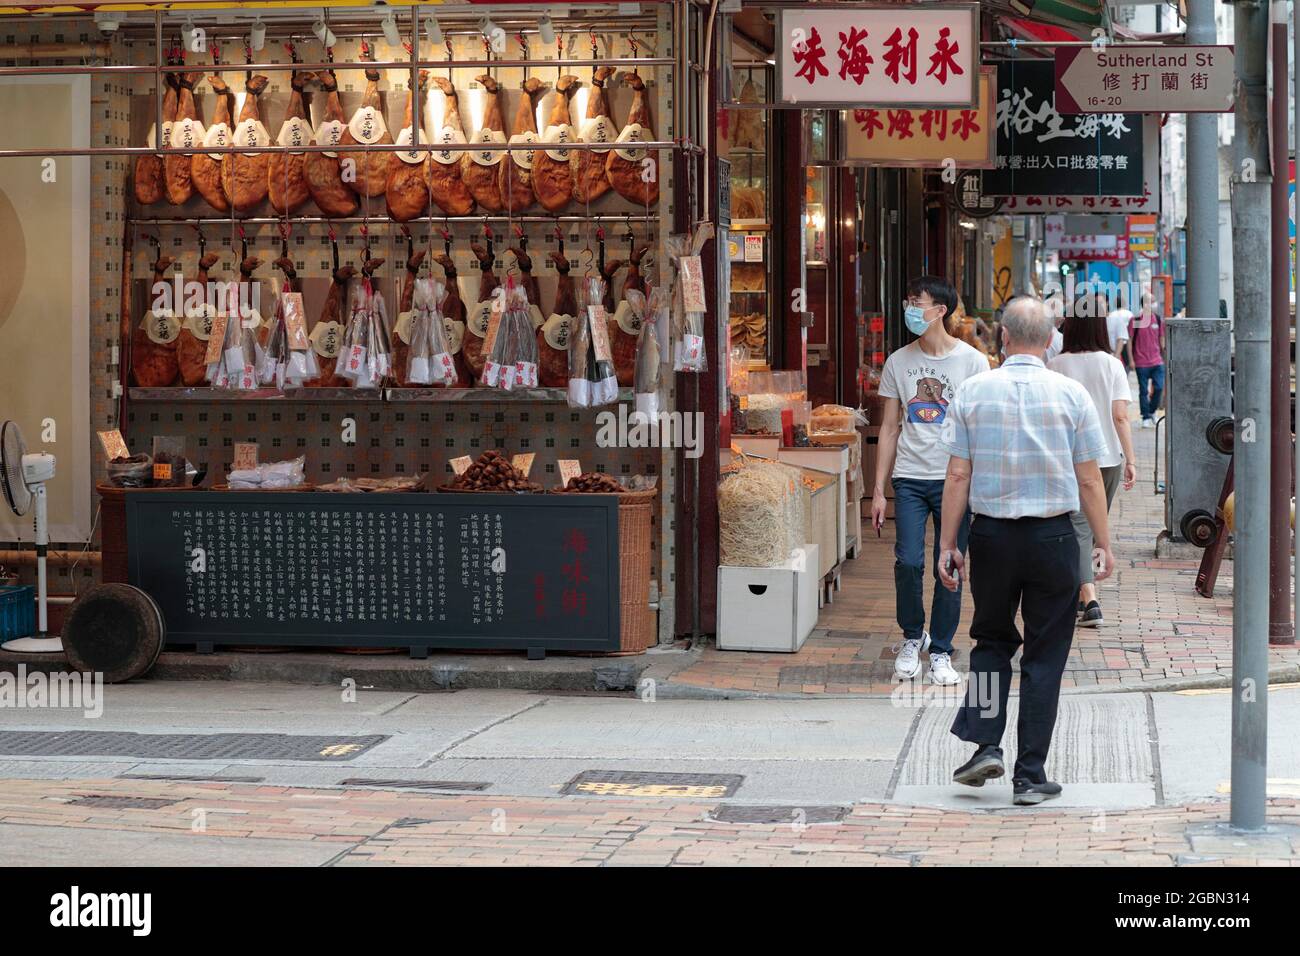 “Wing Lee” Dried Seafood Shop, Des Voeux Road West, junction of Sutherland Street, Sai Ying Pun, Hong Kong 4th August 2021 Stock Photo